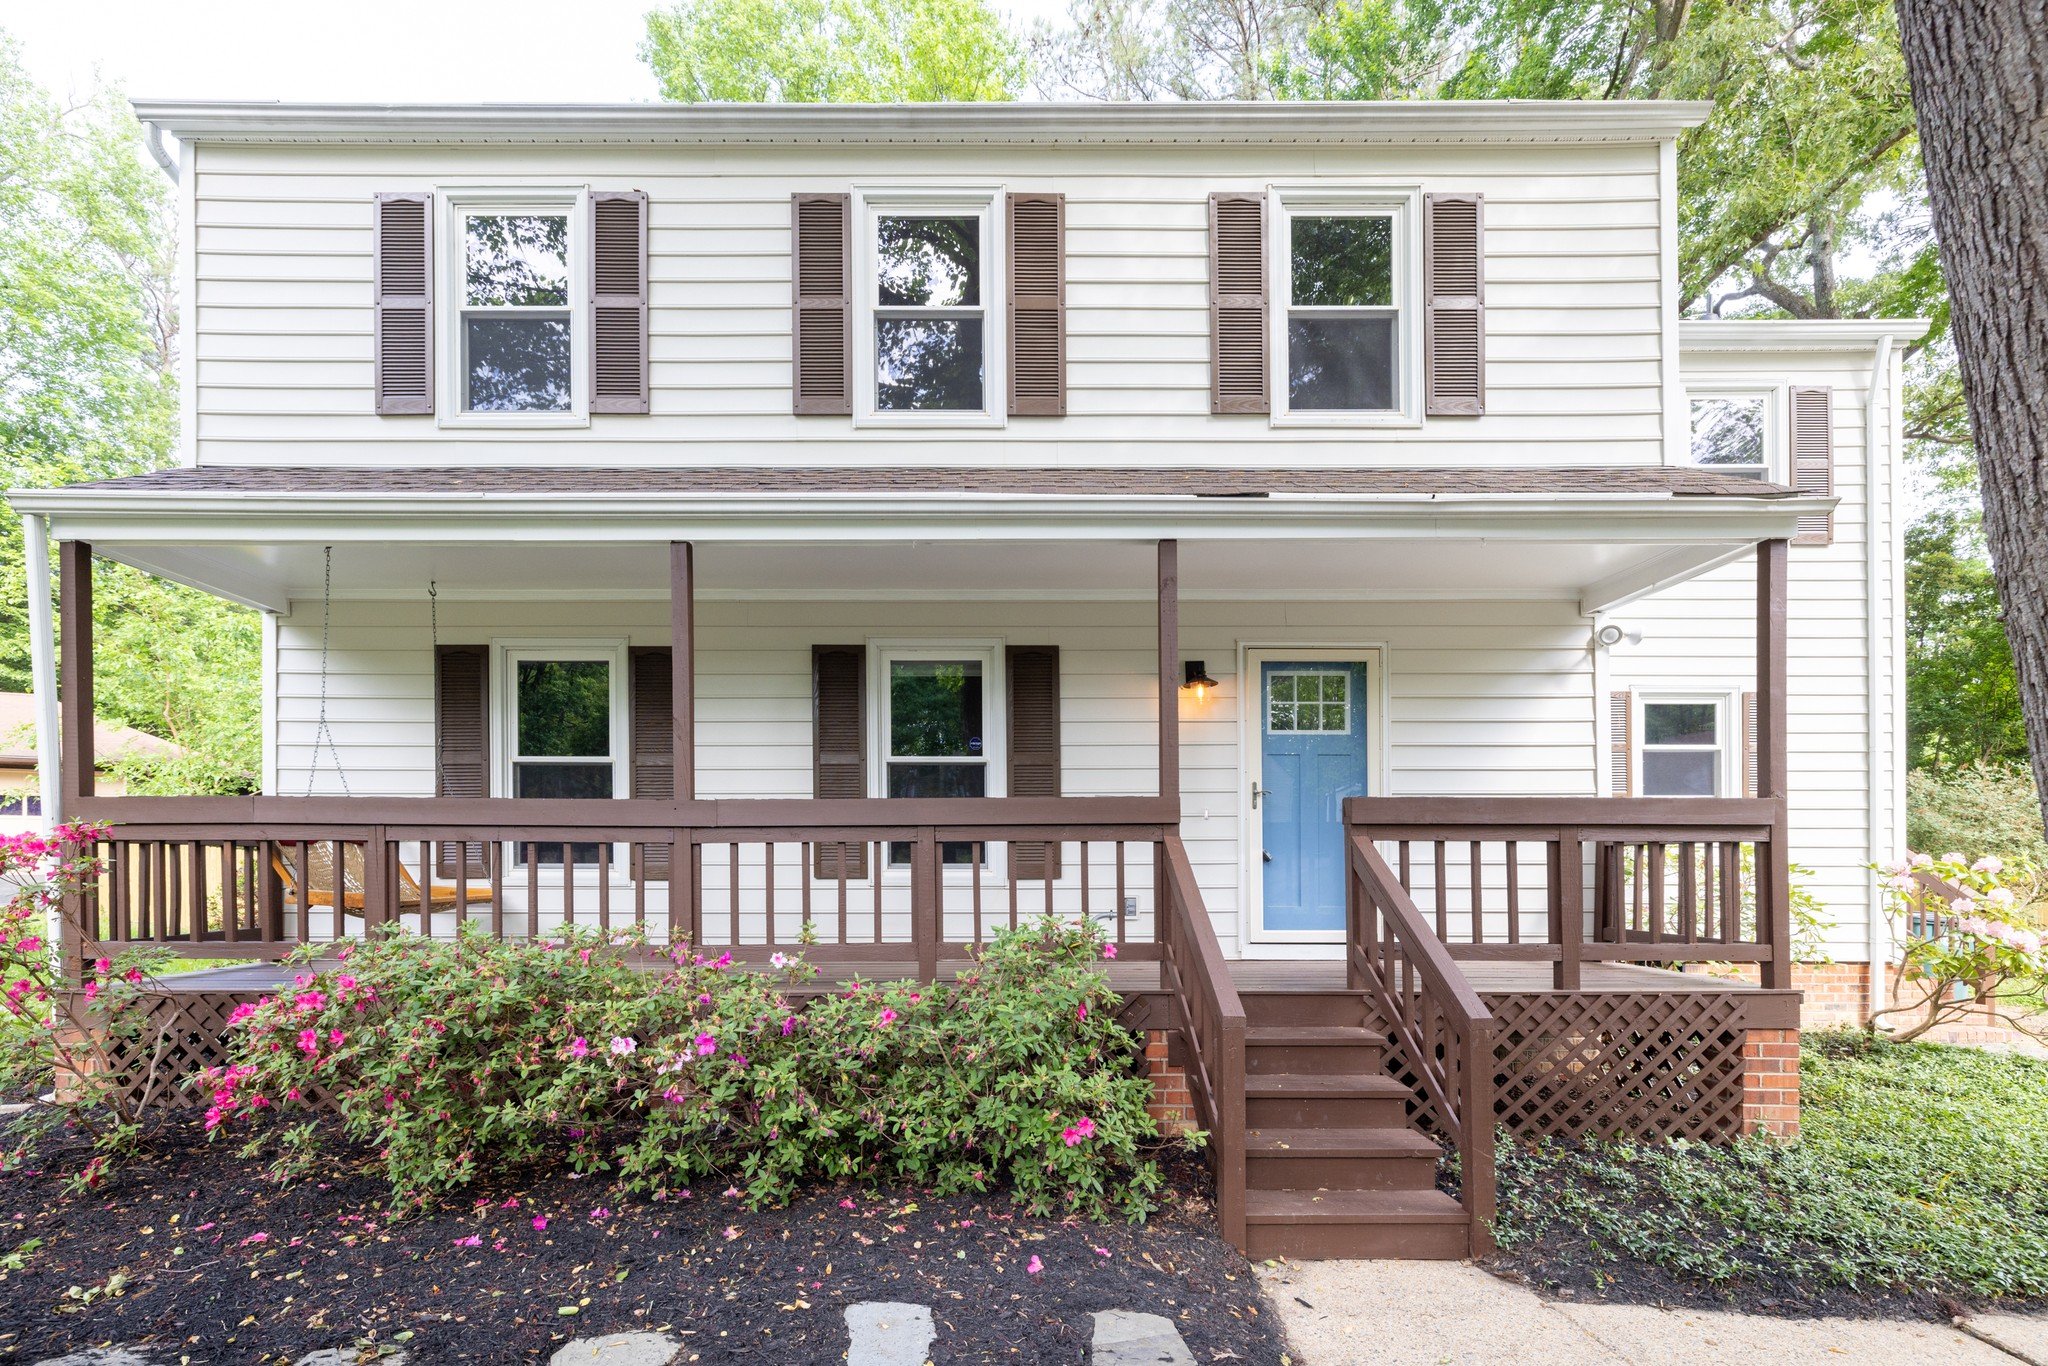 🏡OPEN HOUSE SATURDAY from 2-4PM - Welcome to 2301 Wistar Place! This beautiful 2 story colonial home offers 4 bedrooms, 2.5 bathrooms, and sits on a quiet cul-de-sac. As you enter, you will find fresh paint throughout, new carpet, updated bathrooms,